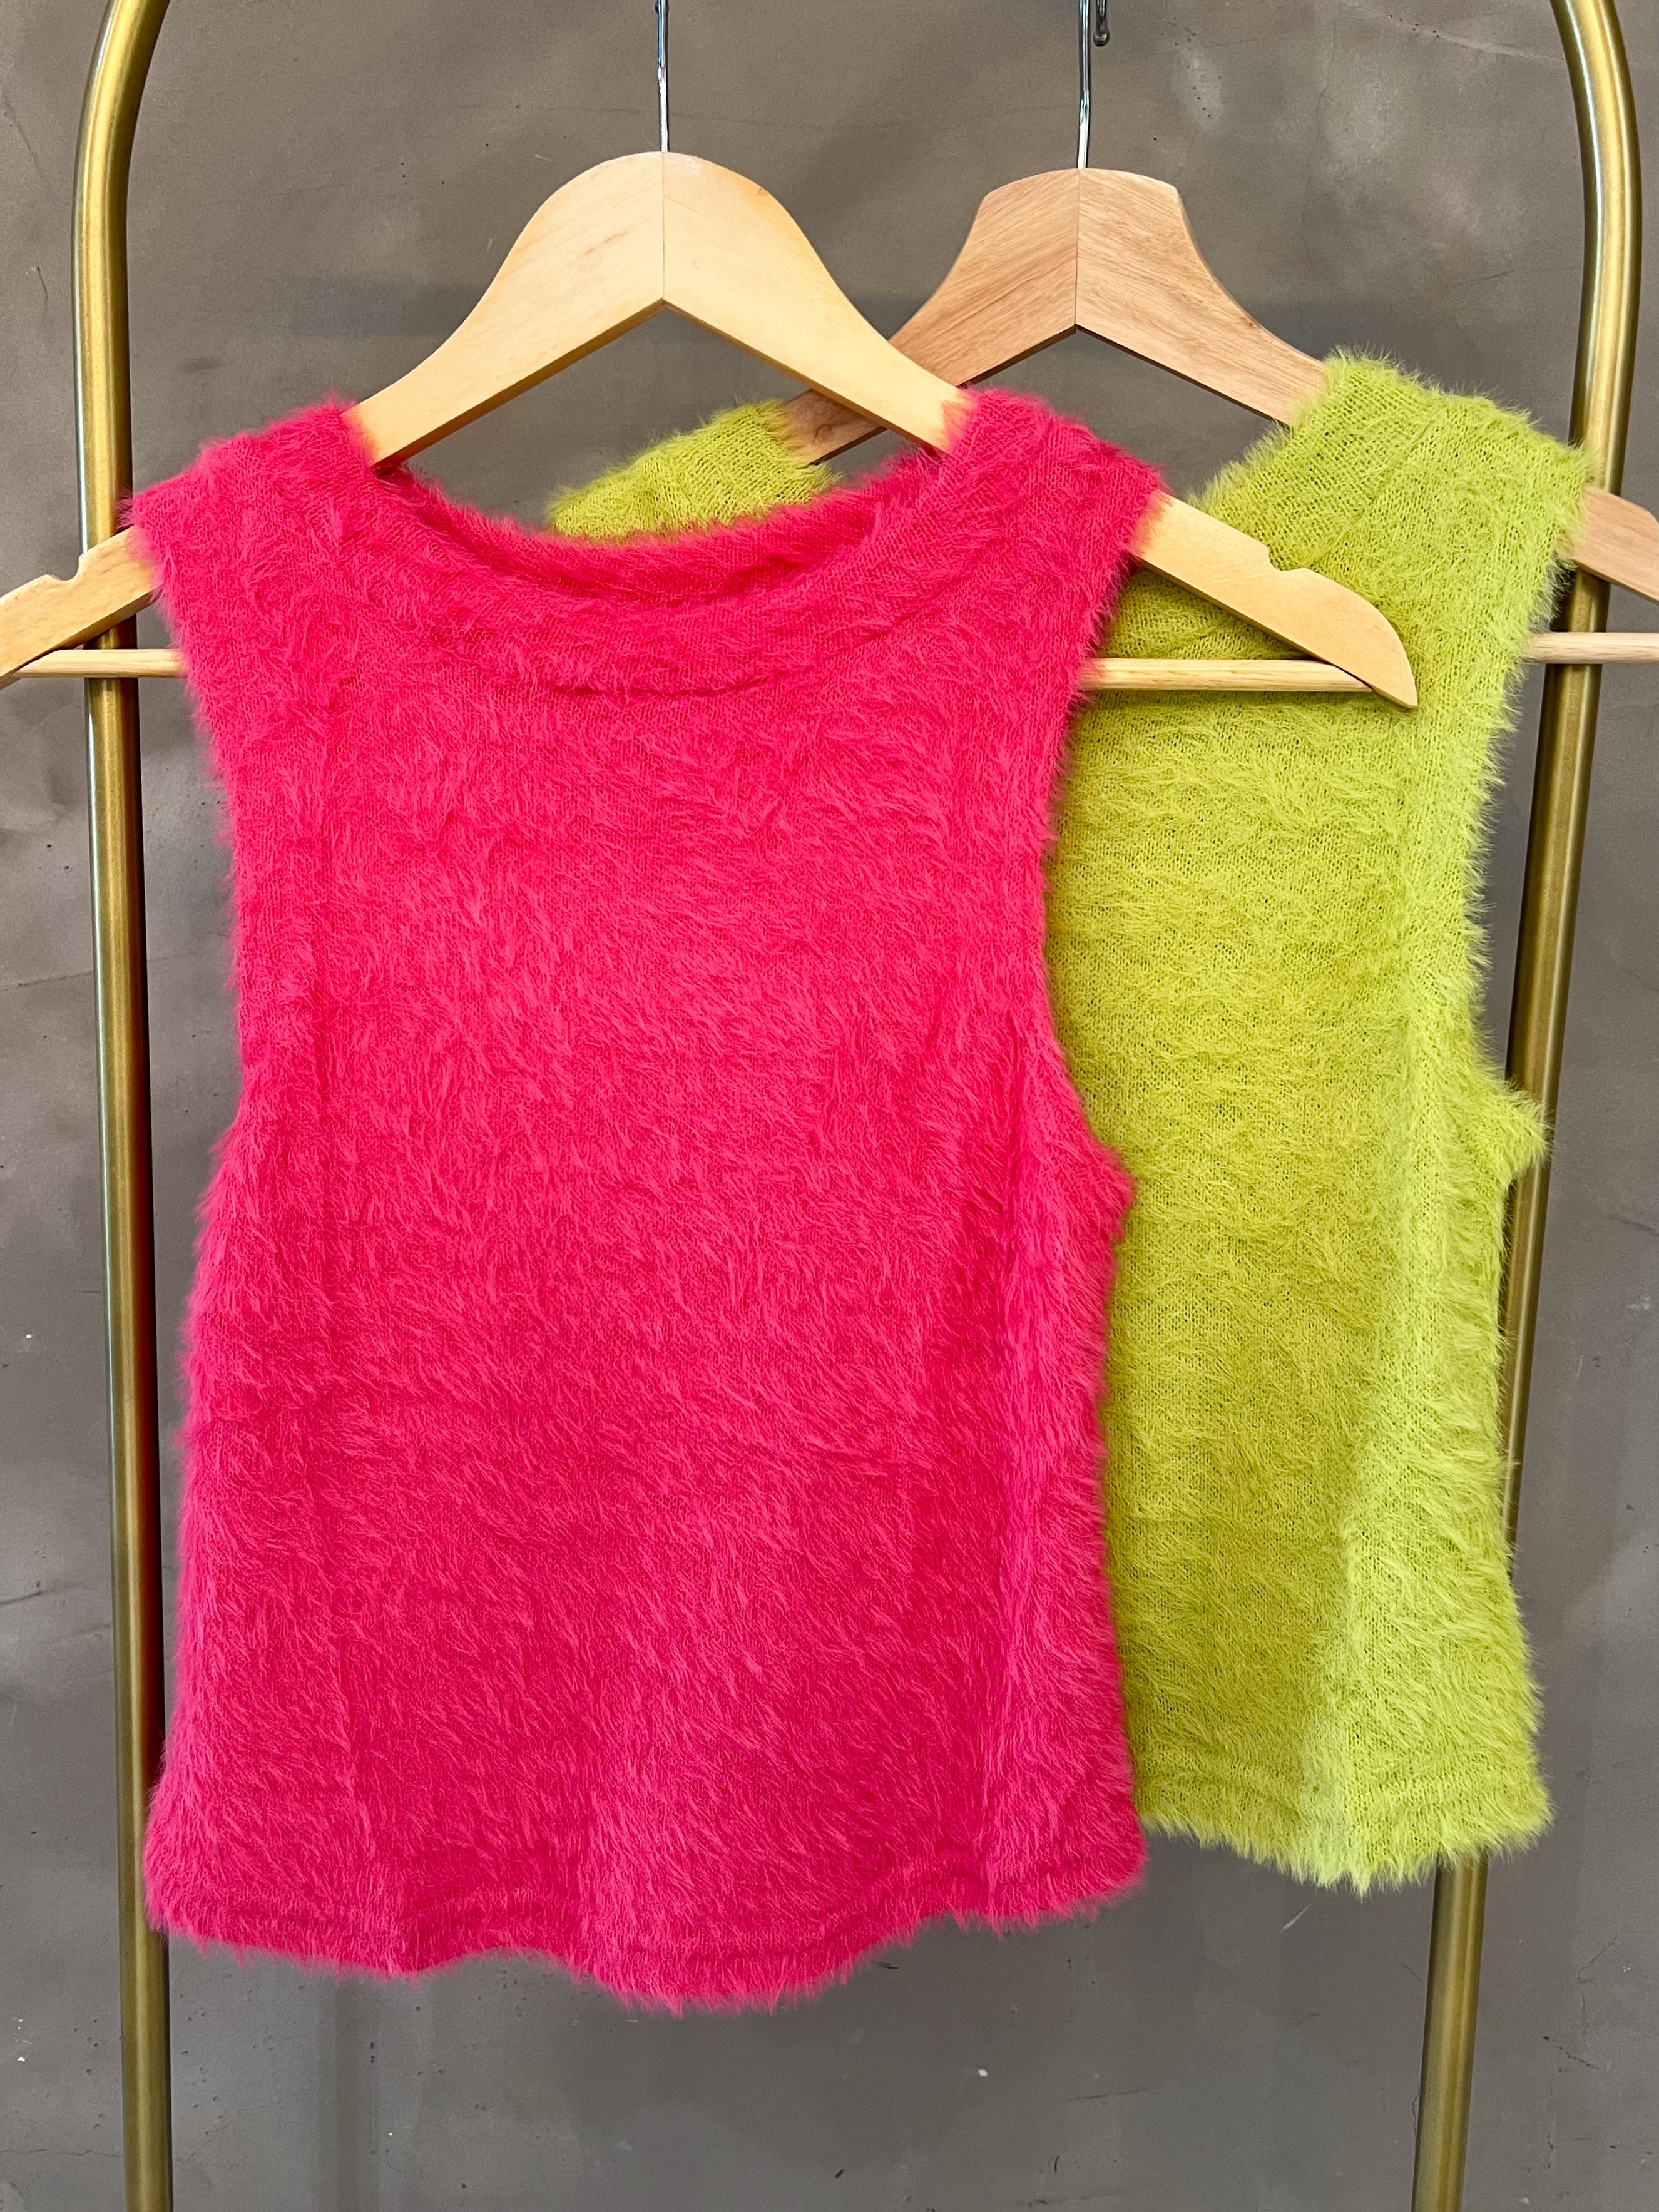 THE FUZZY BASIC TANK TOP IN HOT PINK